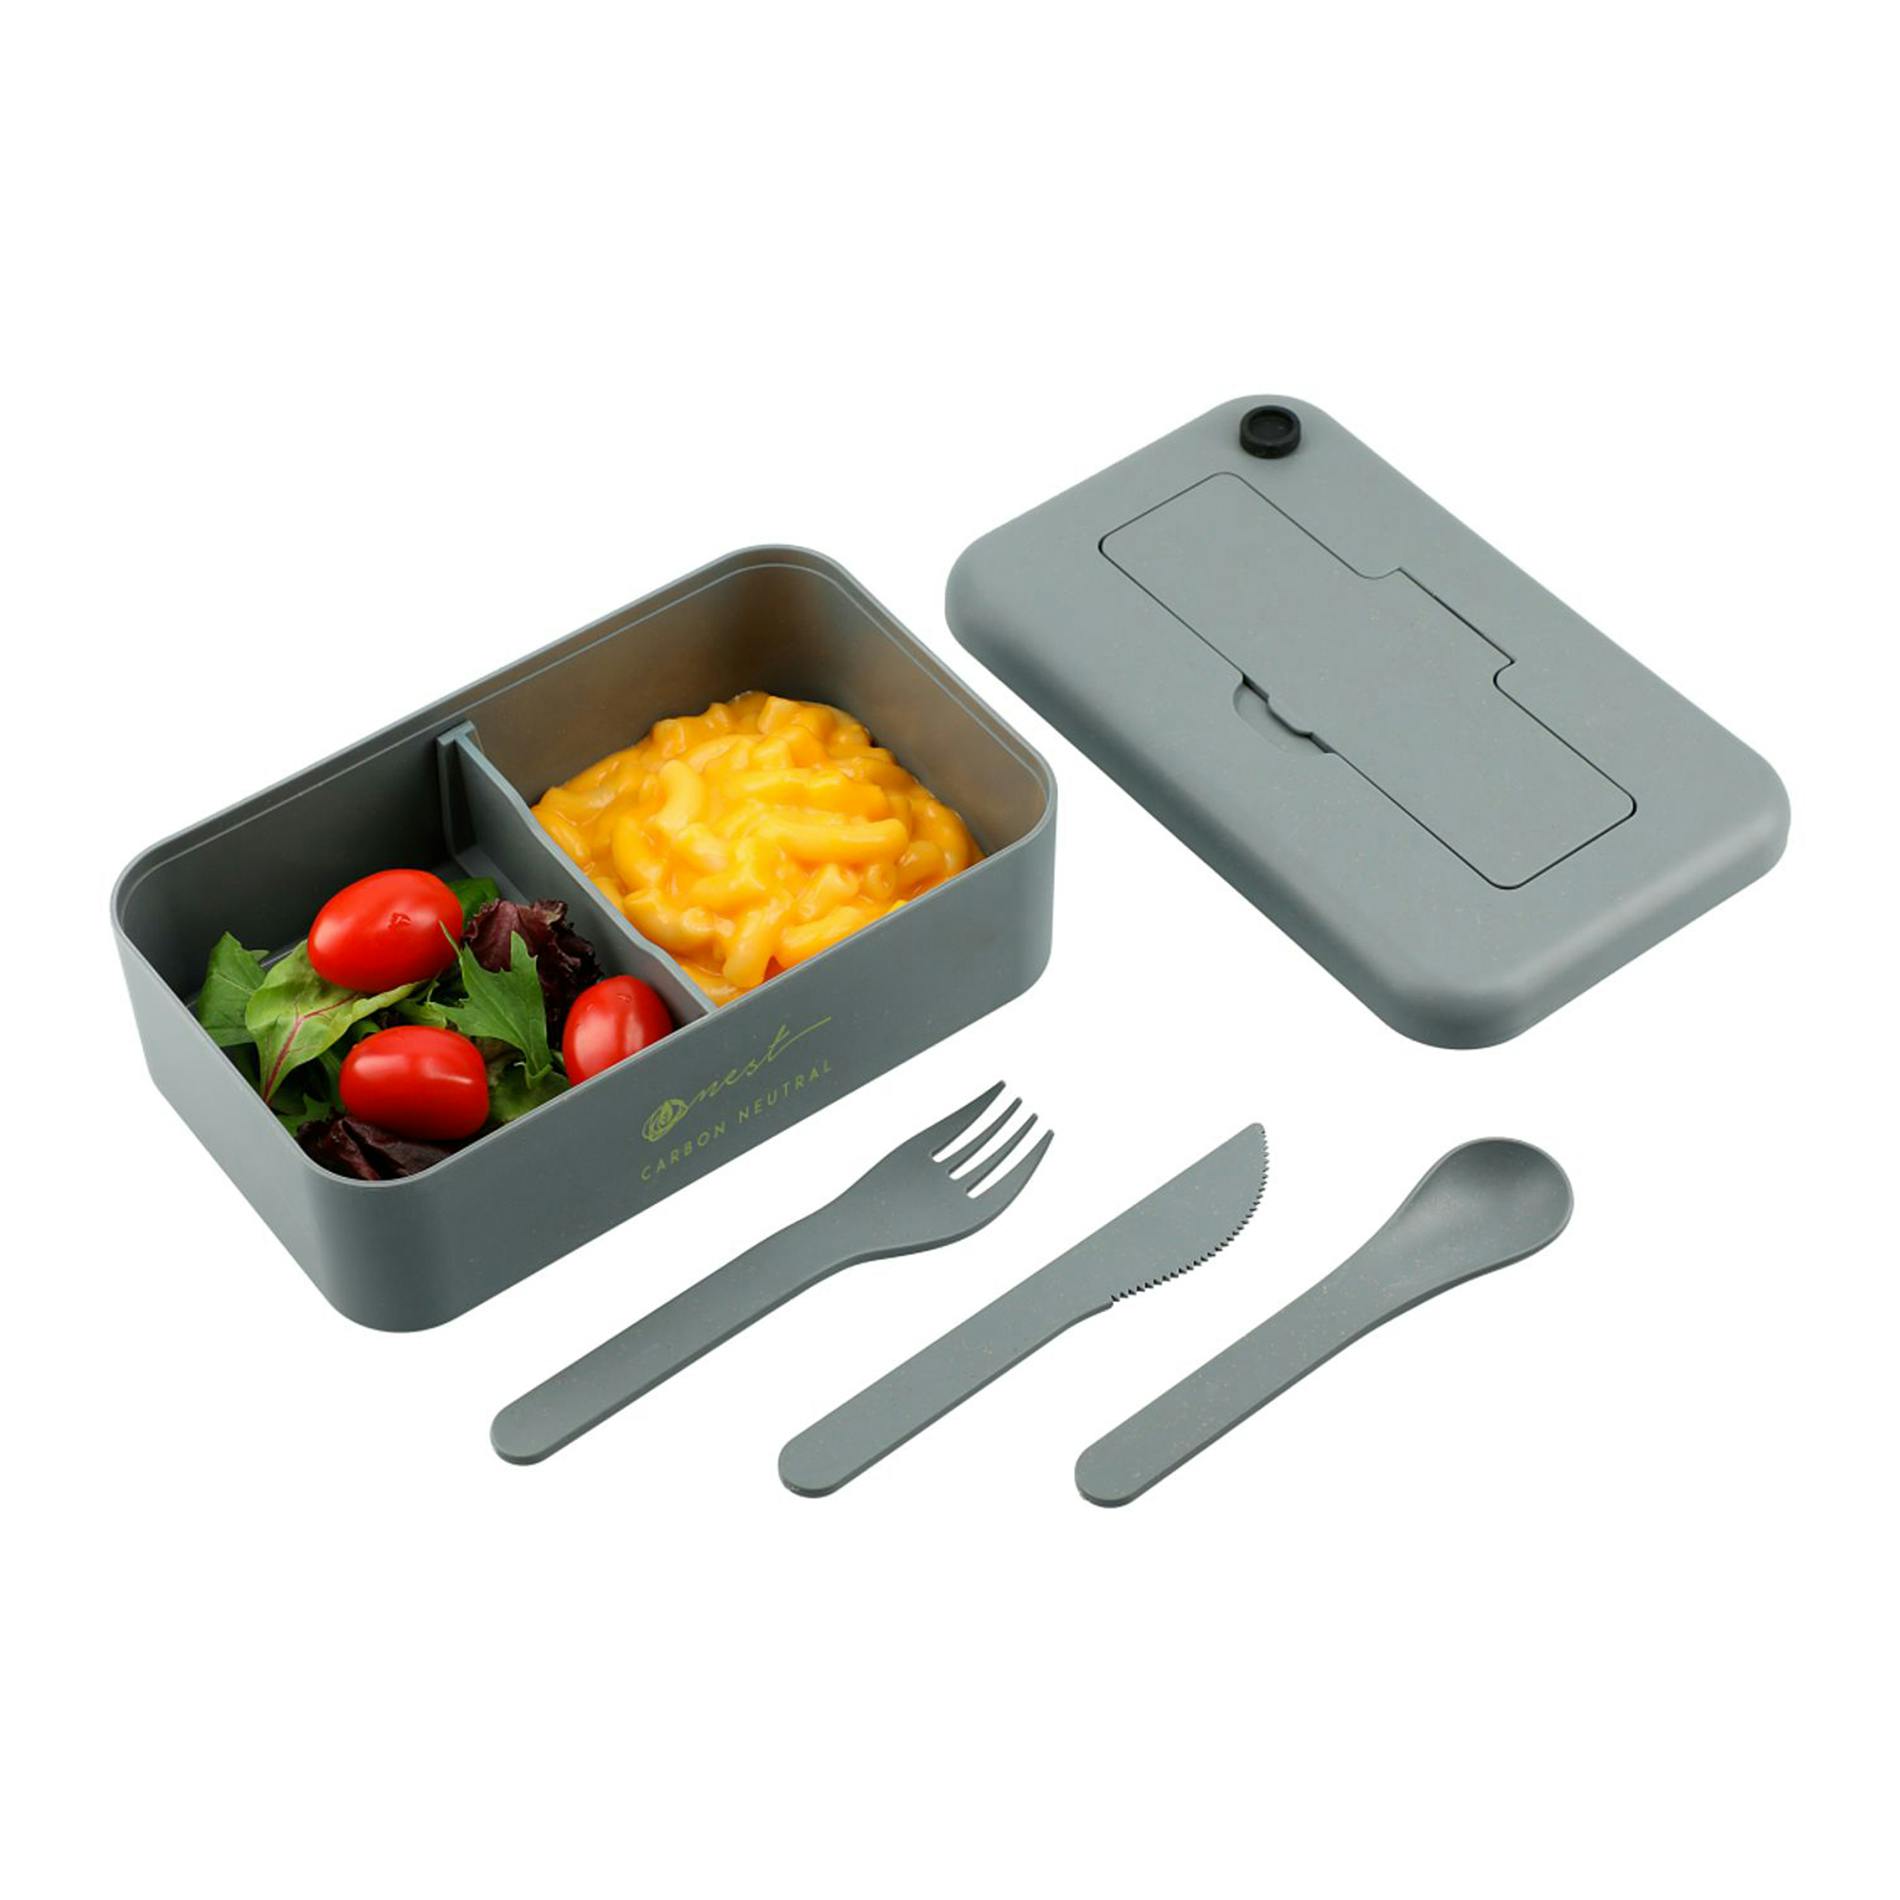 Bamboo Fiber Lunch Box with Utensils - additional Image 1